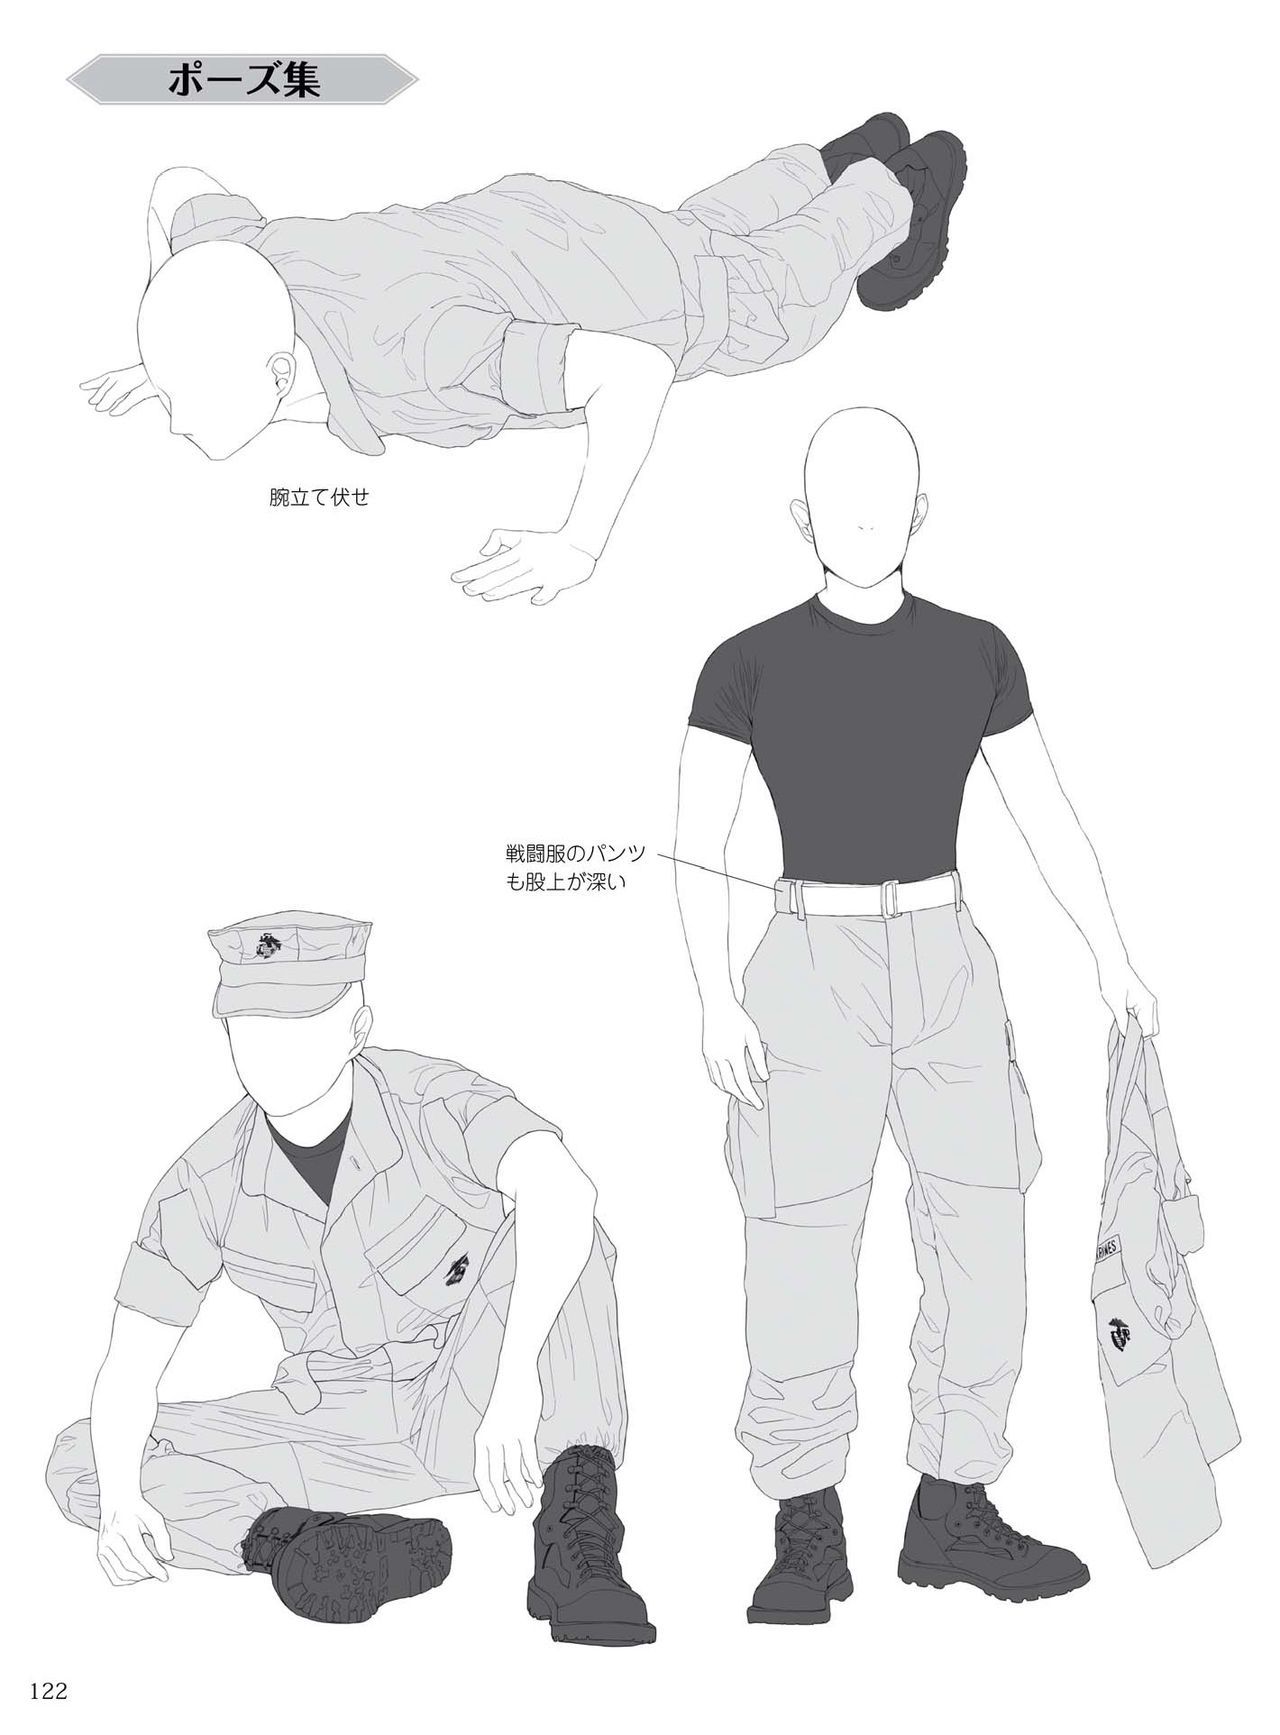 How to draw military uniforms and uniforms From Self-Defense Forces 軍服・制服の描き方 アメリカ軍・自衛隊の制服から戦闘服まで 125